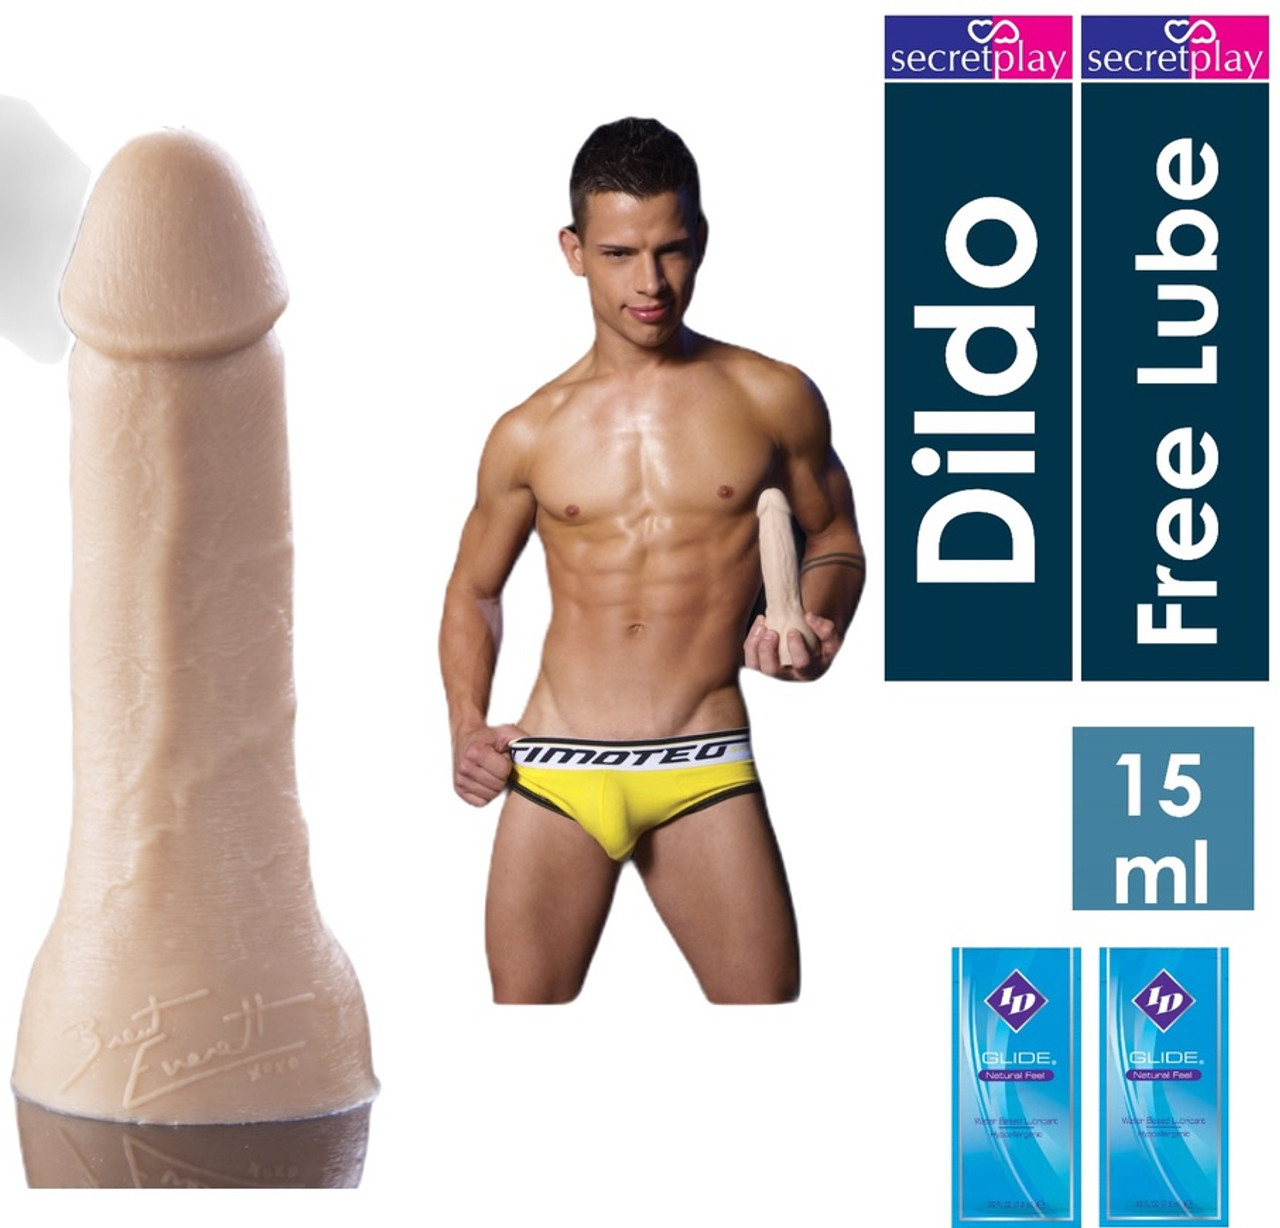 dave mc recommends brent everett dick size pic